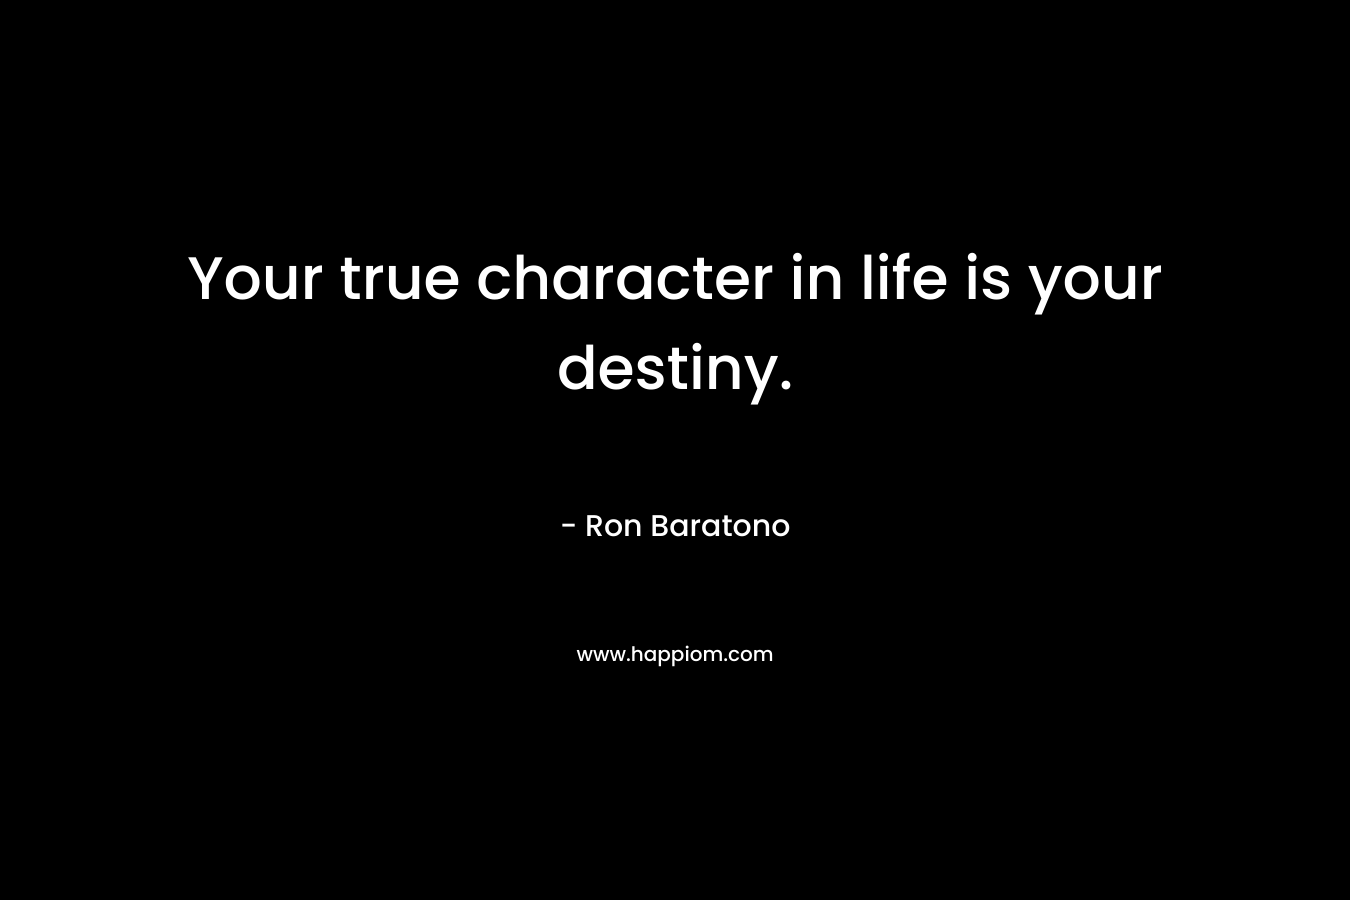 Your true character in life is your destiny.